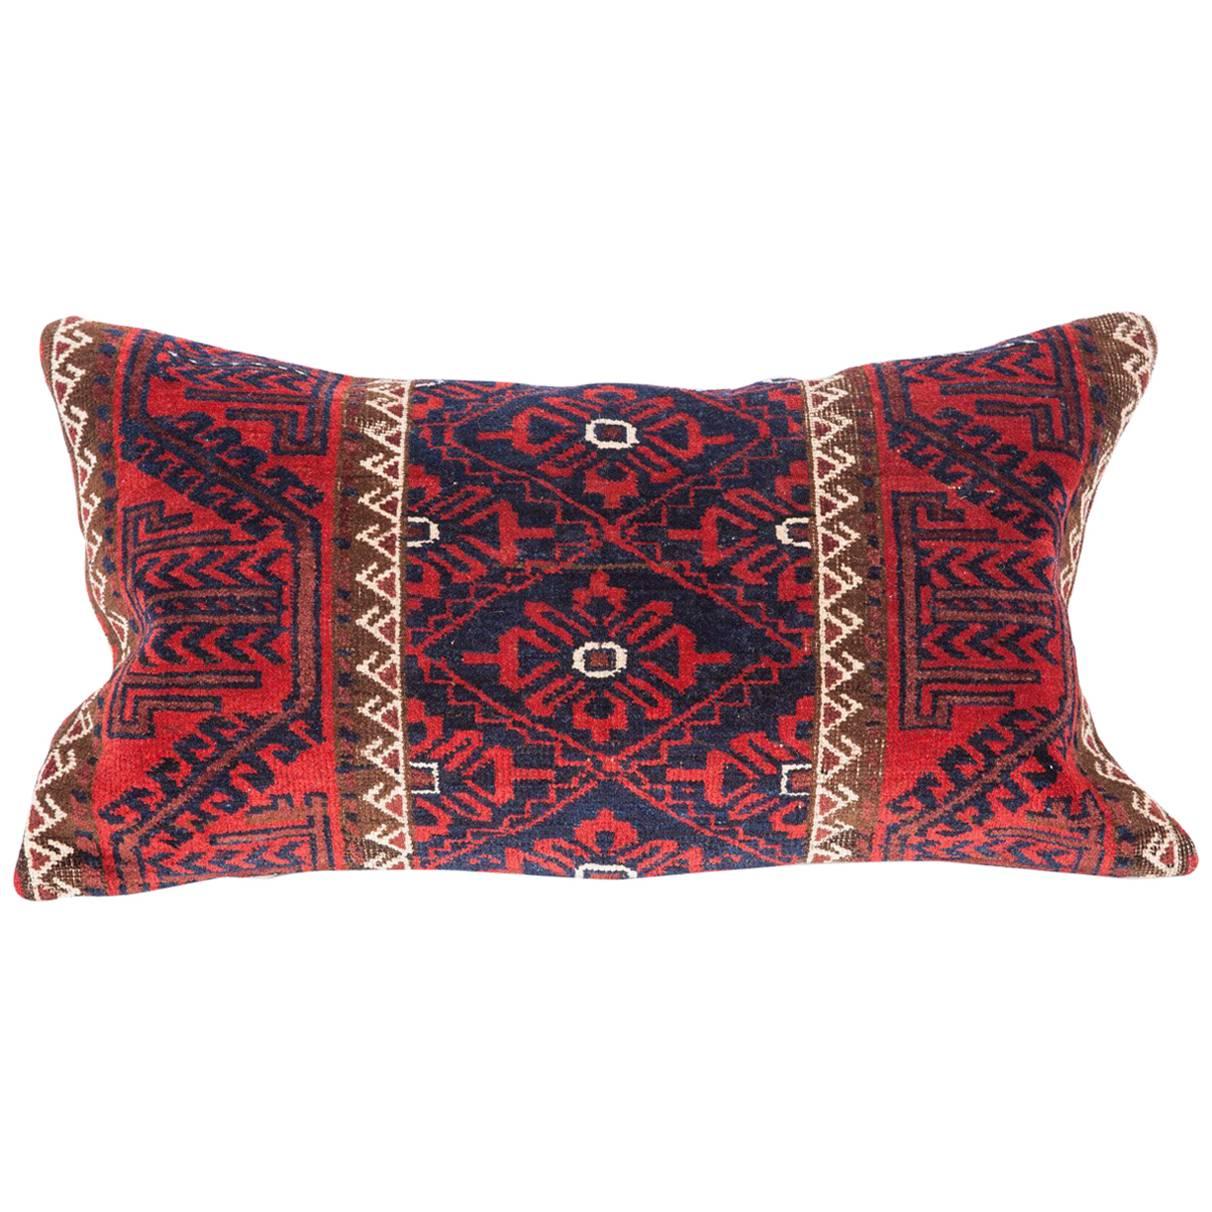 Antique Pillow Made Out of a 19th Century Baluch Rug Fragment